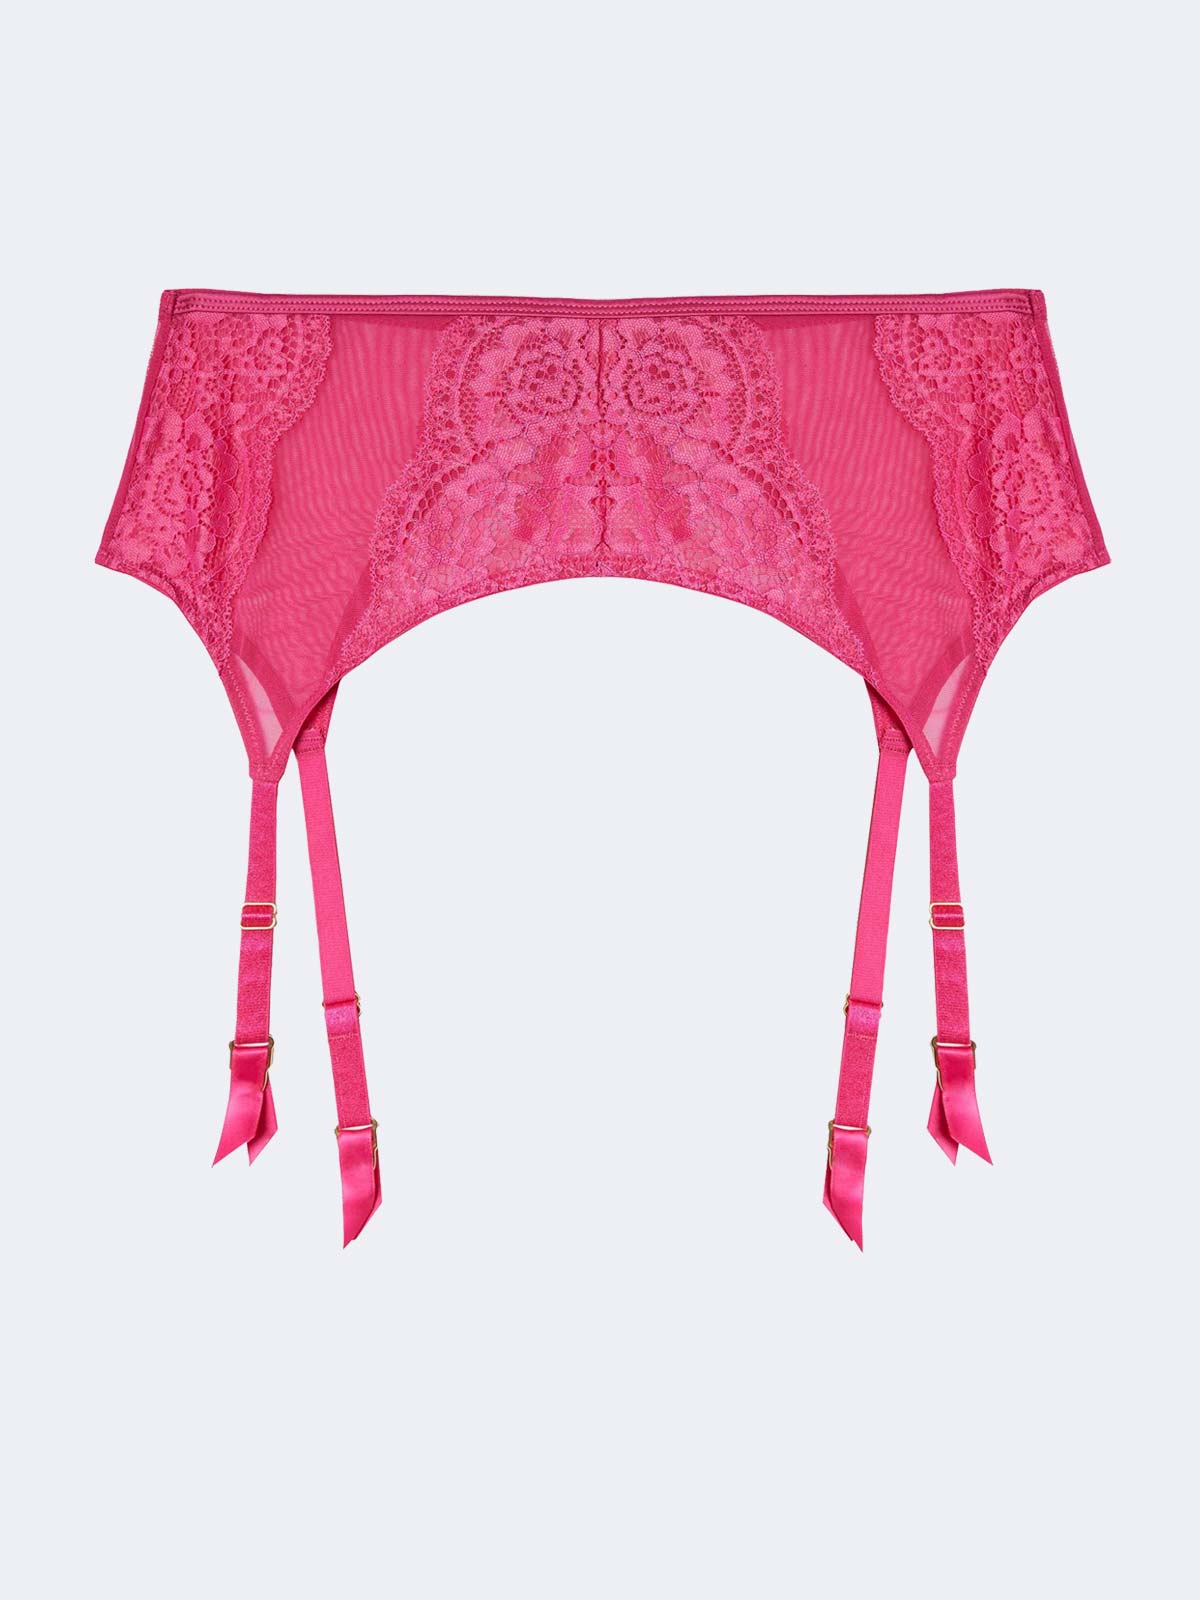 Ophelia Pink Lace Suspender Belt by Playful Promises